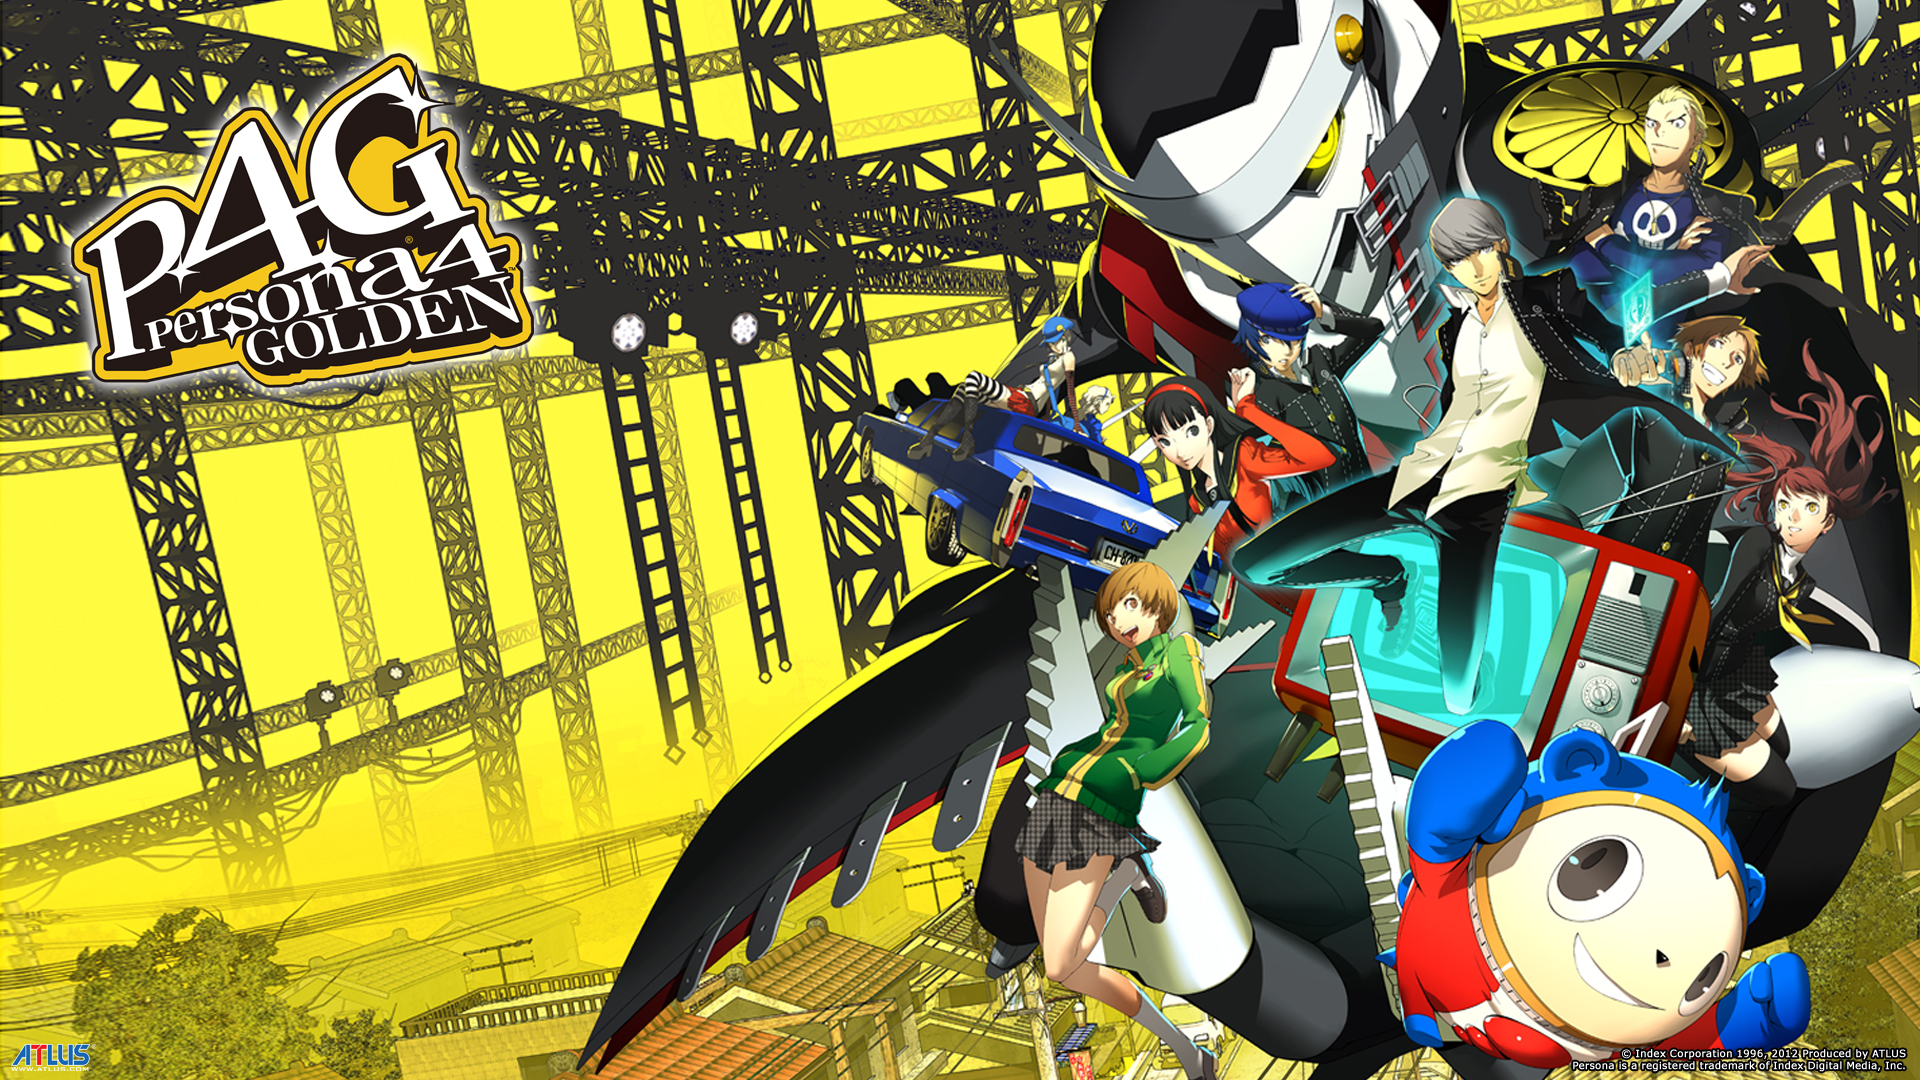 can you play persona 4 on ps4